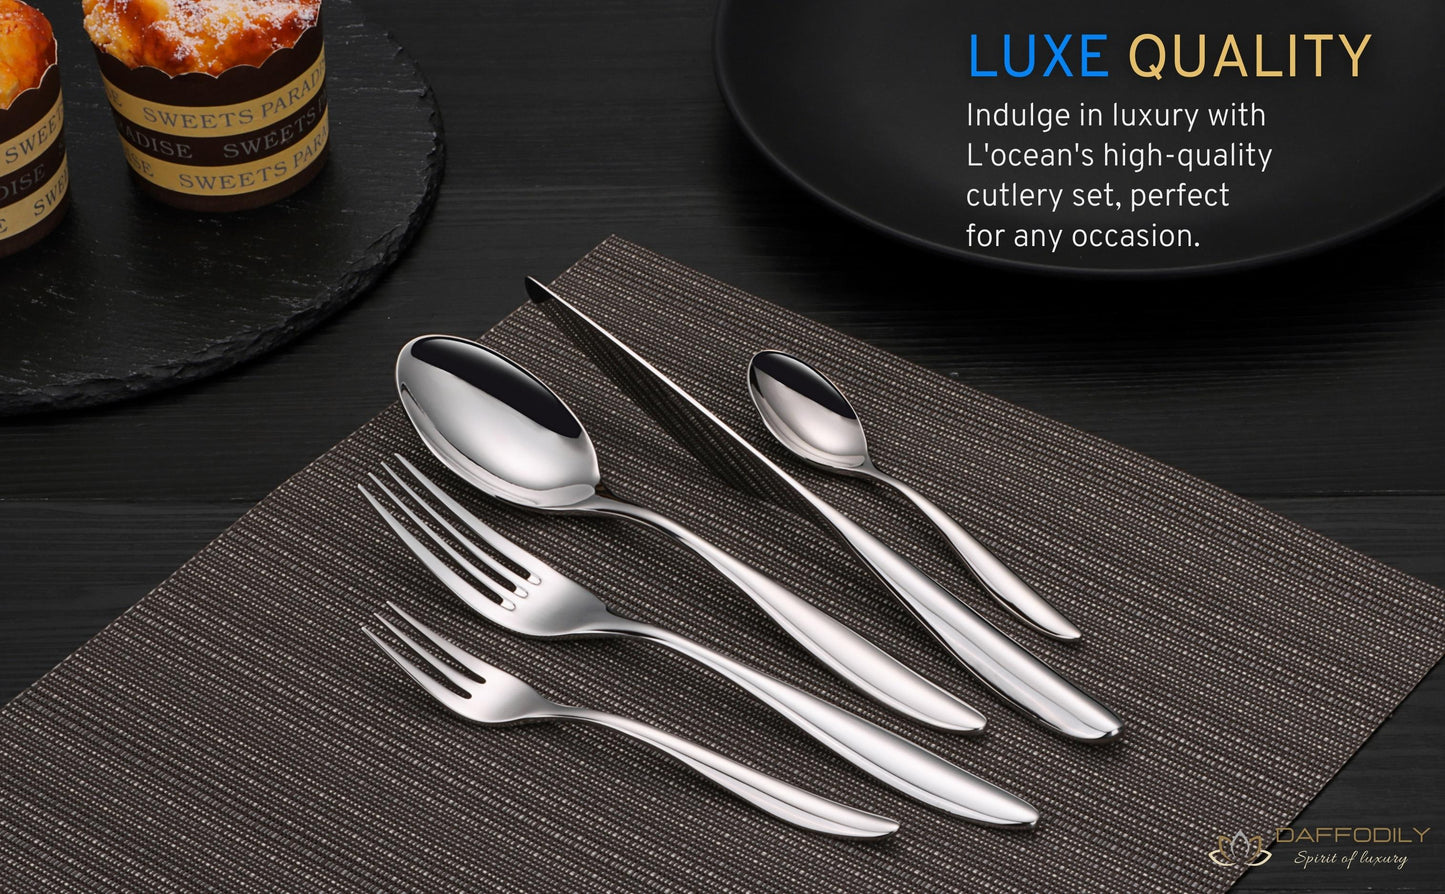 Modern and sleek stainless steel cutlery for everyday use